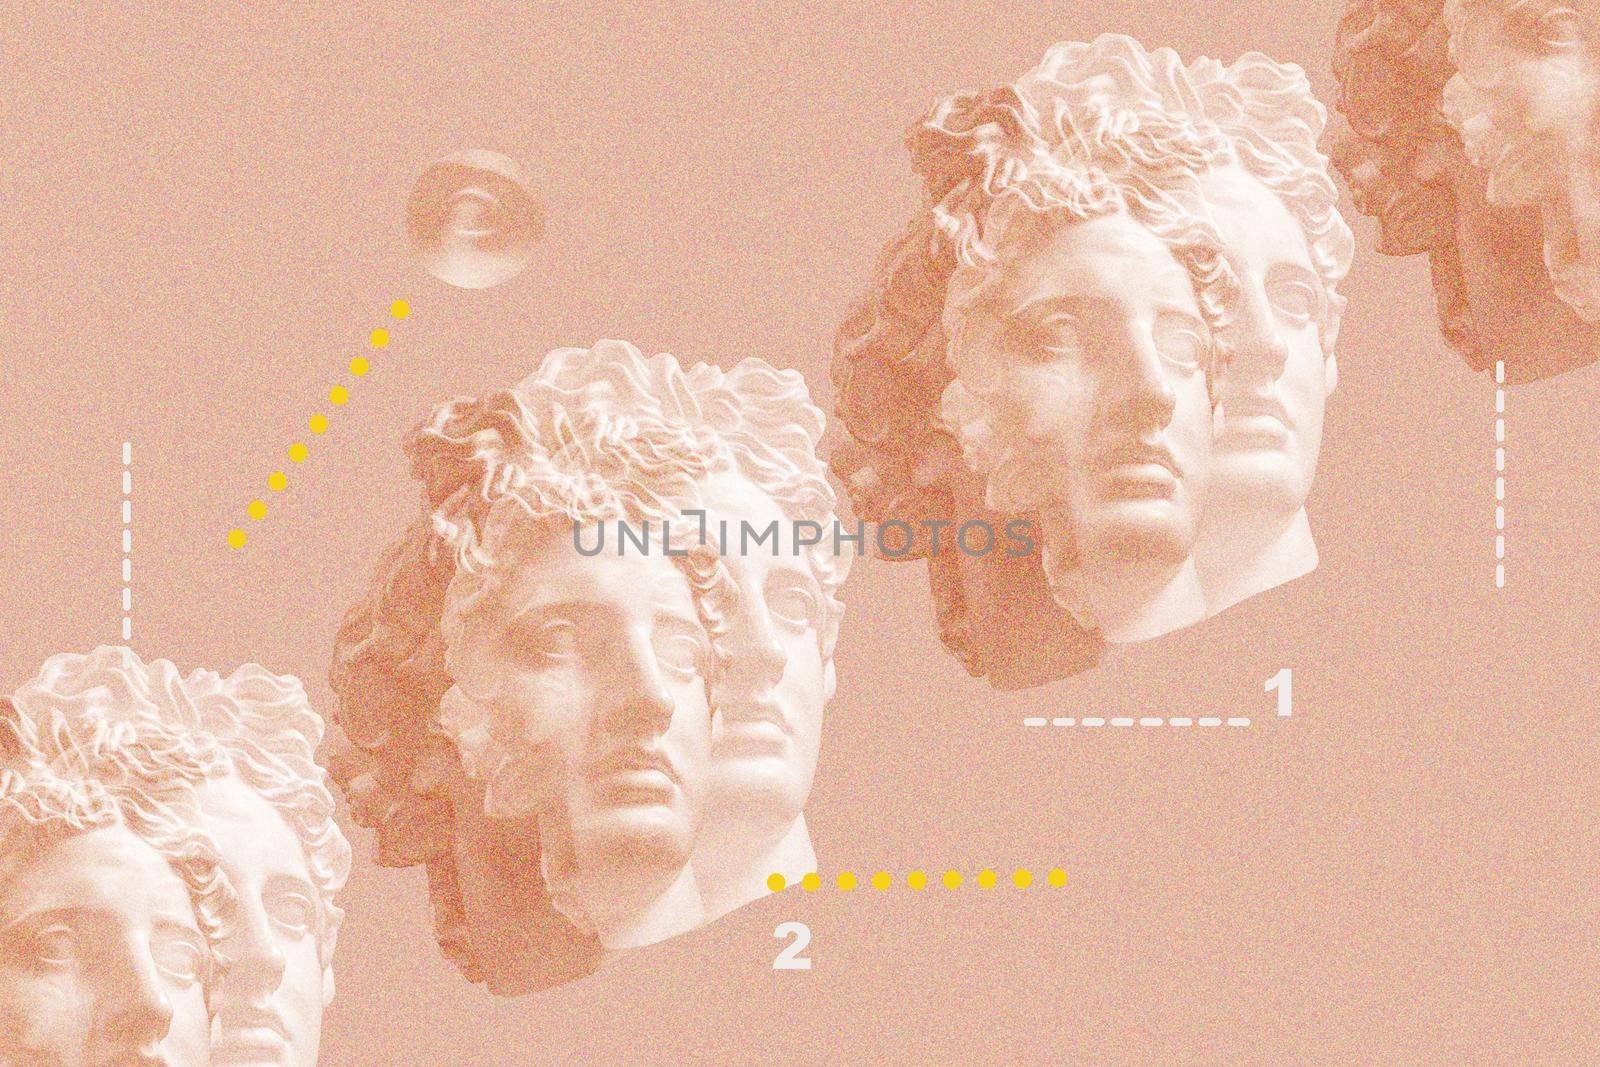 Art collage with antique sculpture of Apollo face and numbers, geometric shapes. Beauty, fashion and health theme. Science, research, discovery, technology concept. Zine culture. Pop art style. by bashta